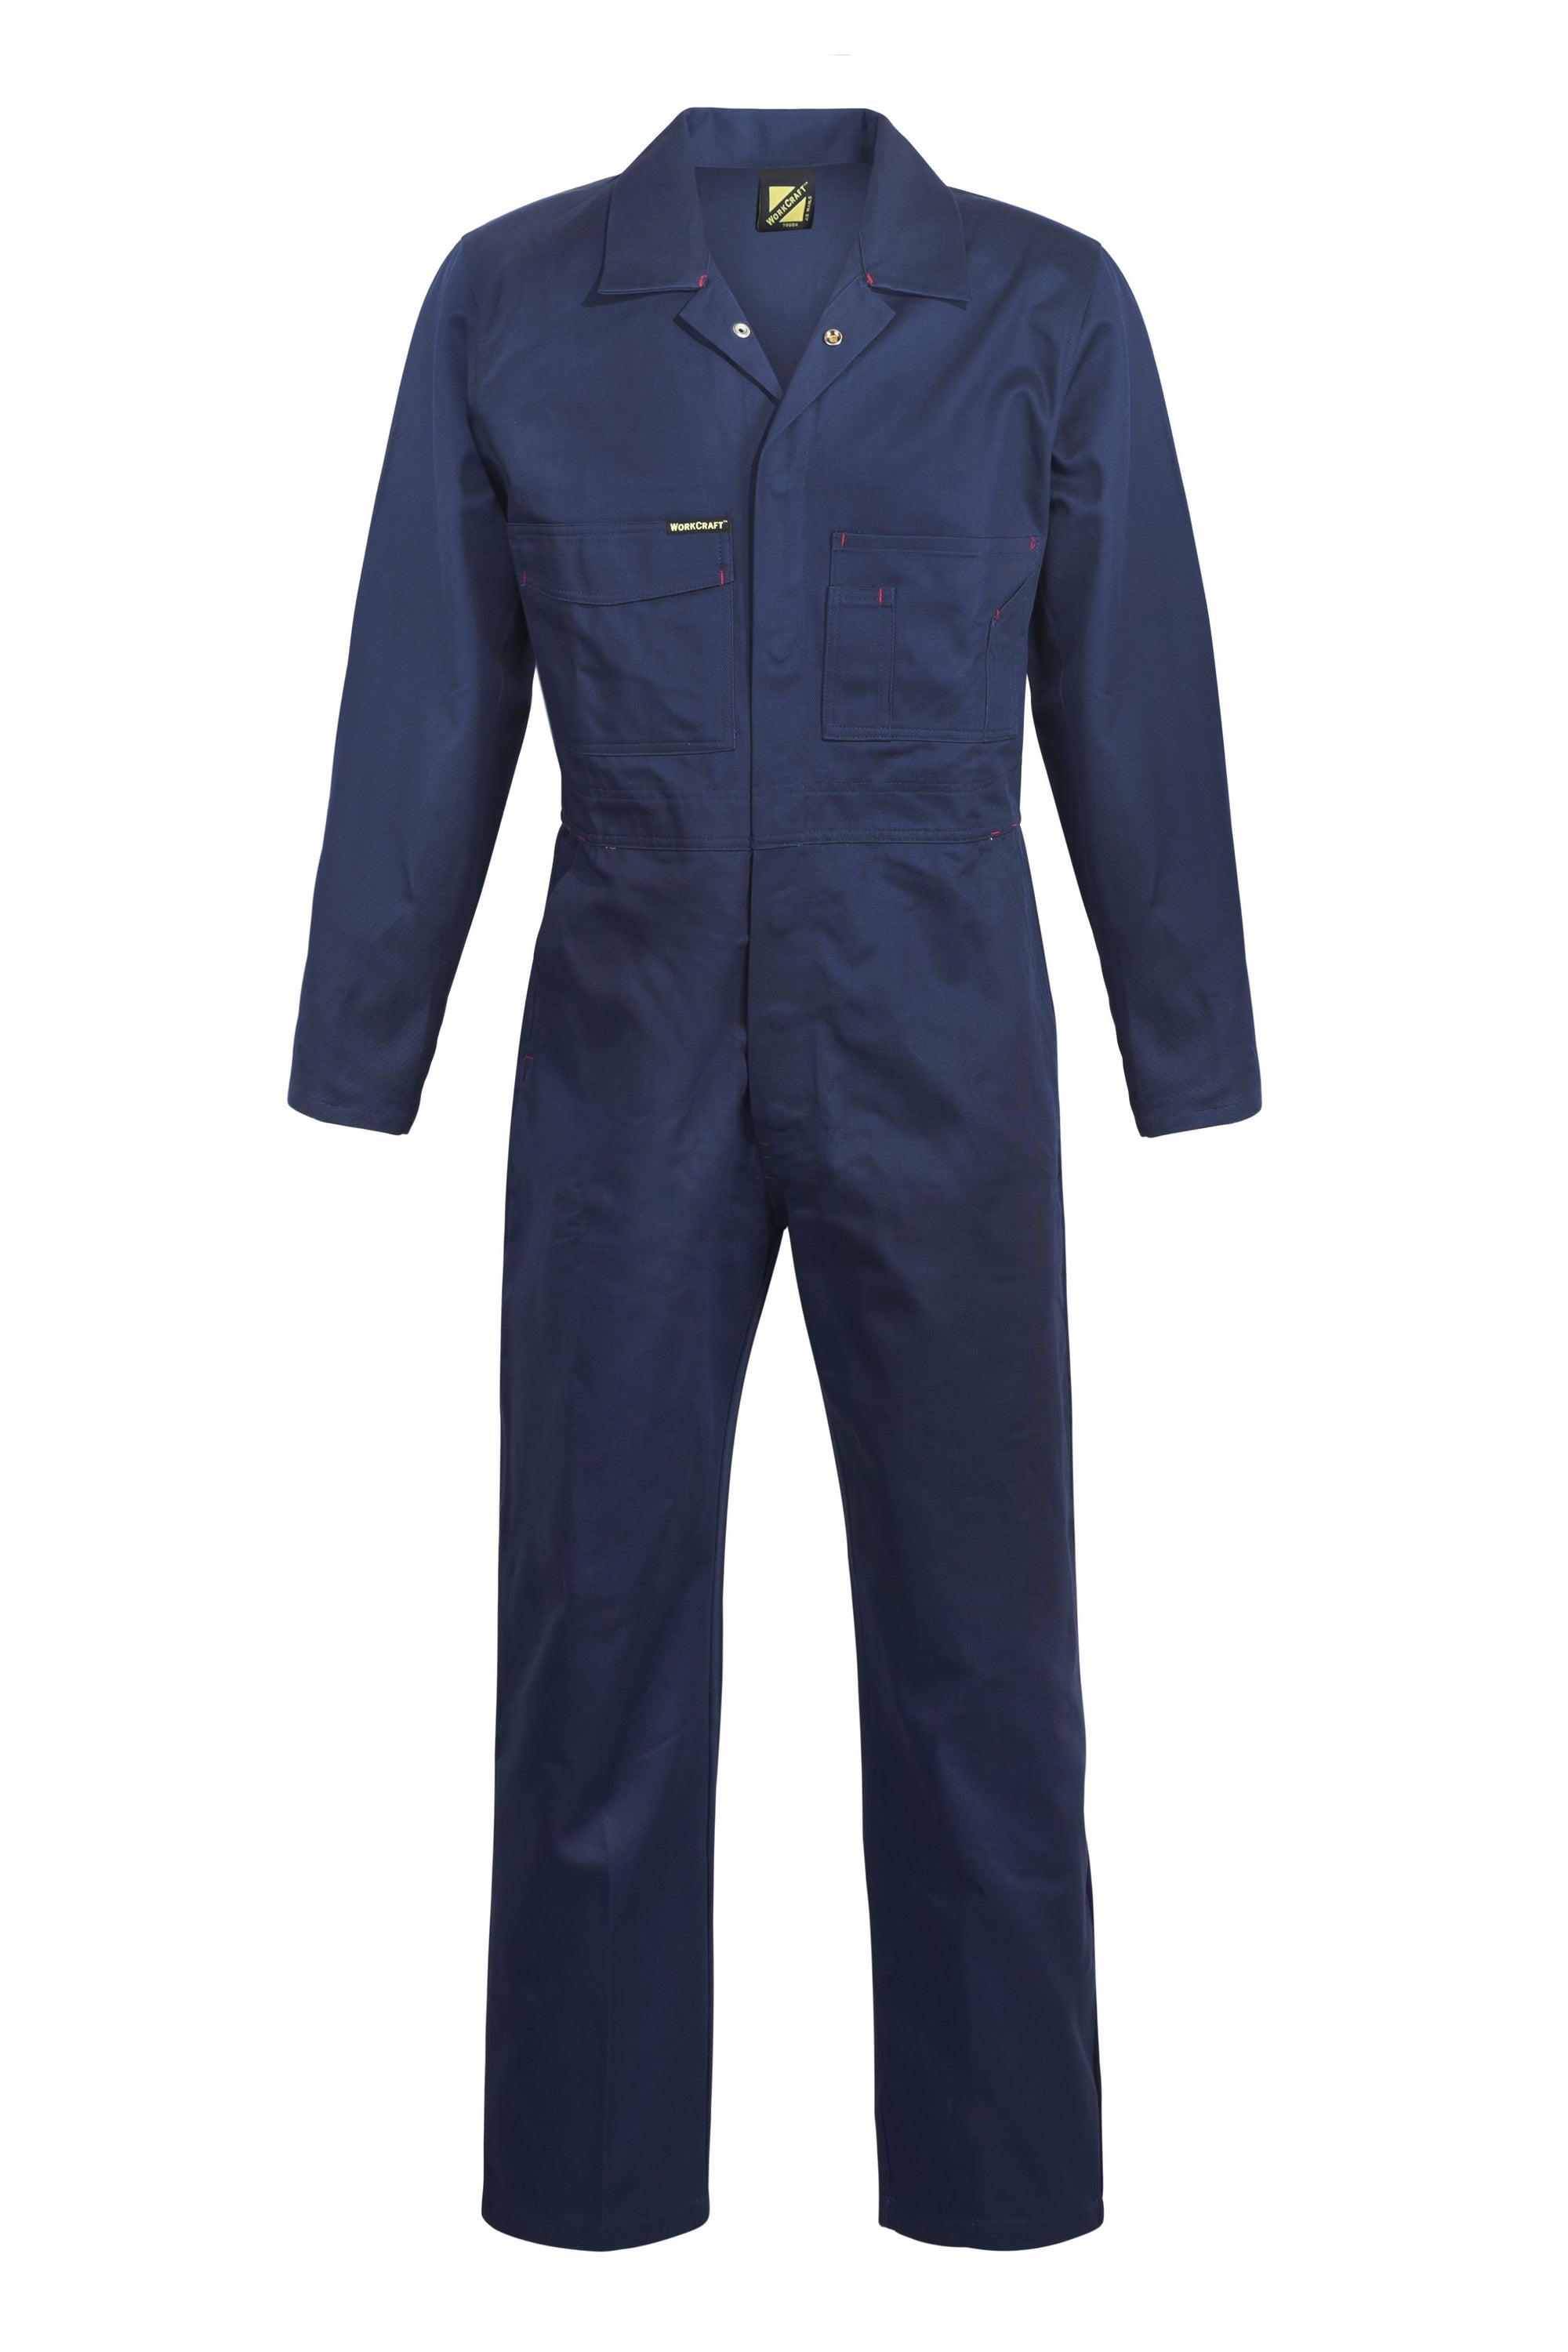 WorkCraft Mens Drill Coveralls 310g Navy 102R